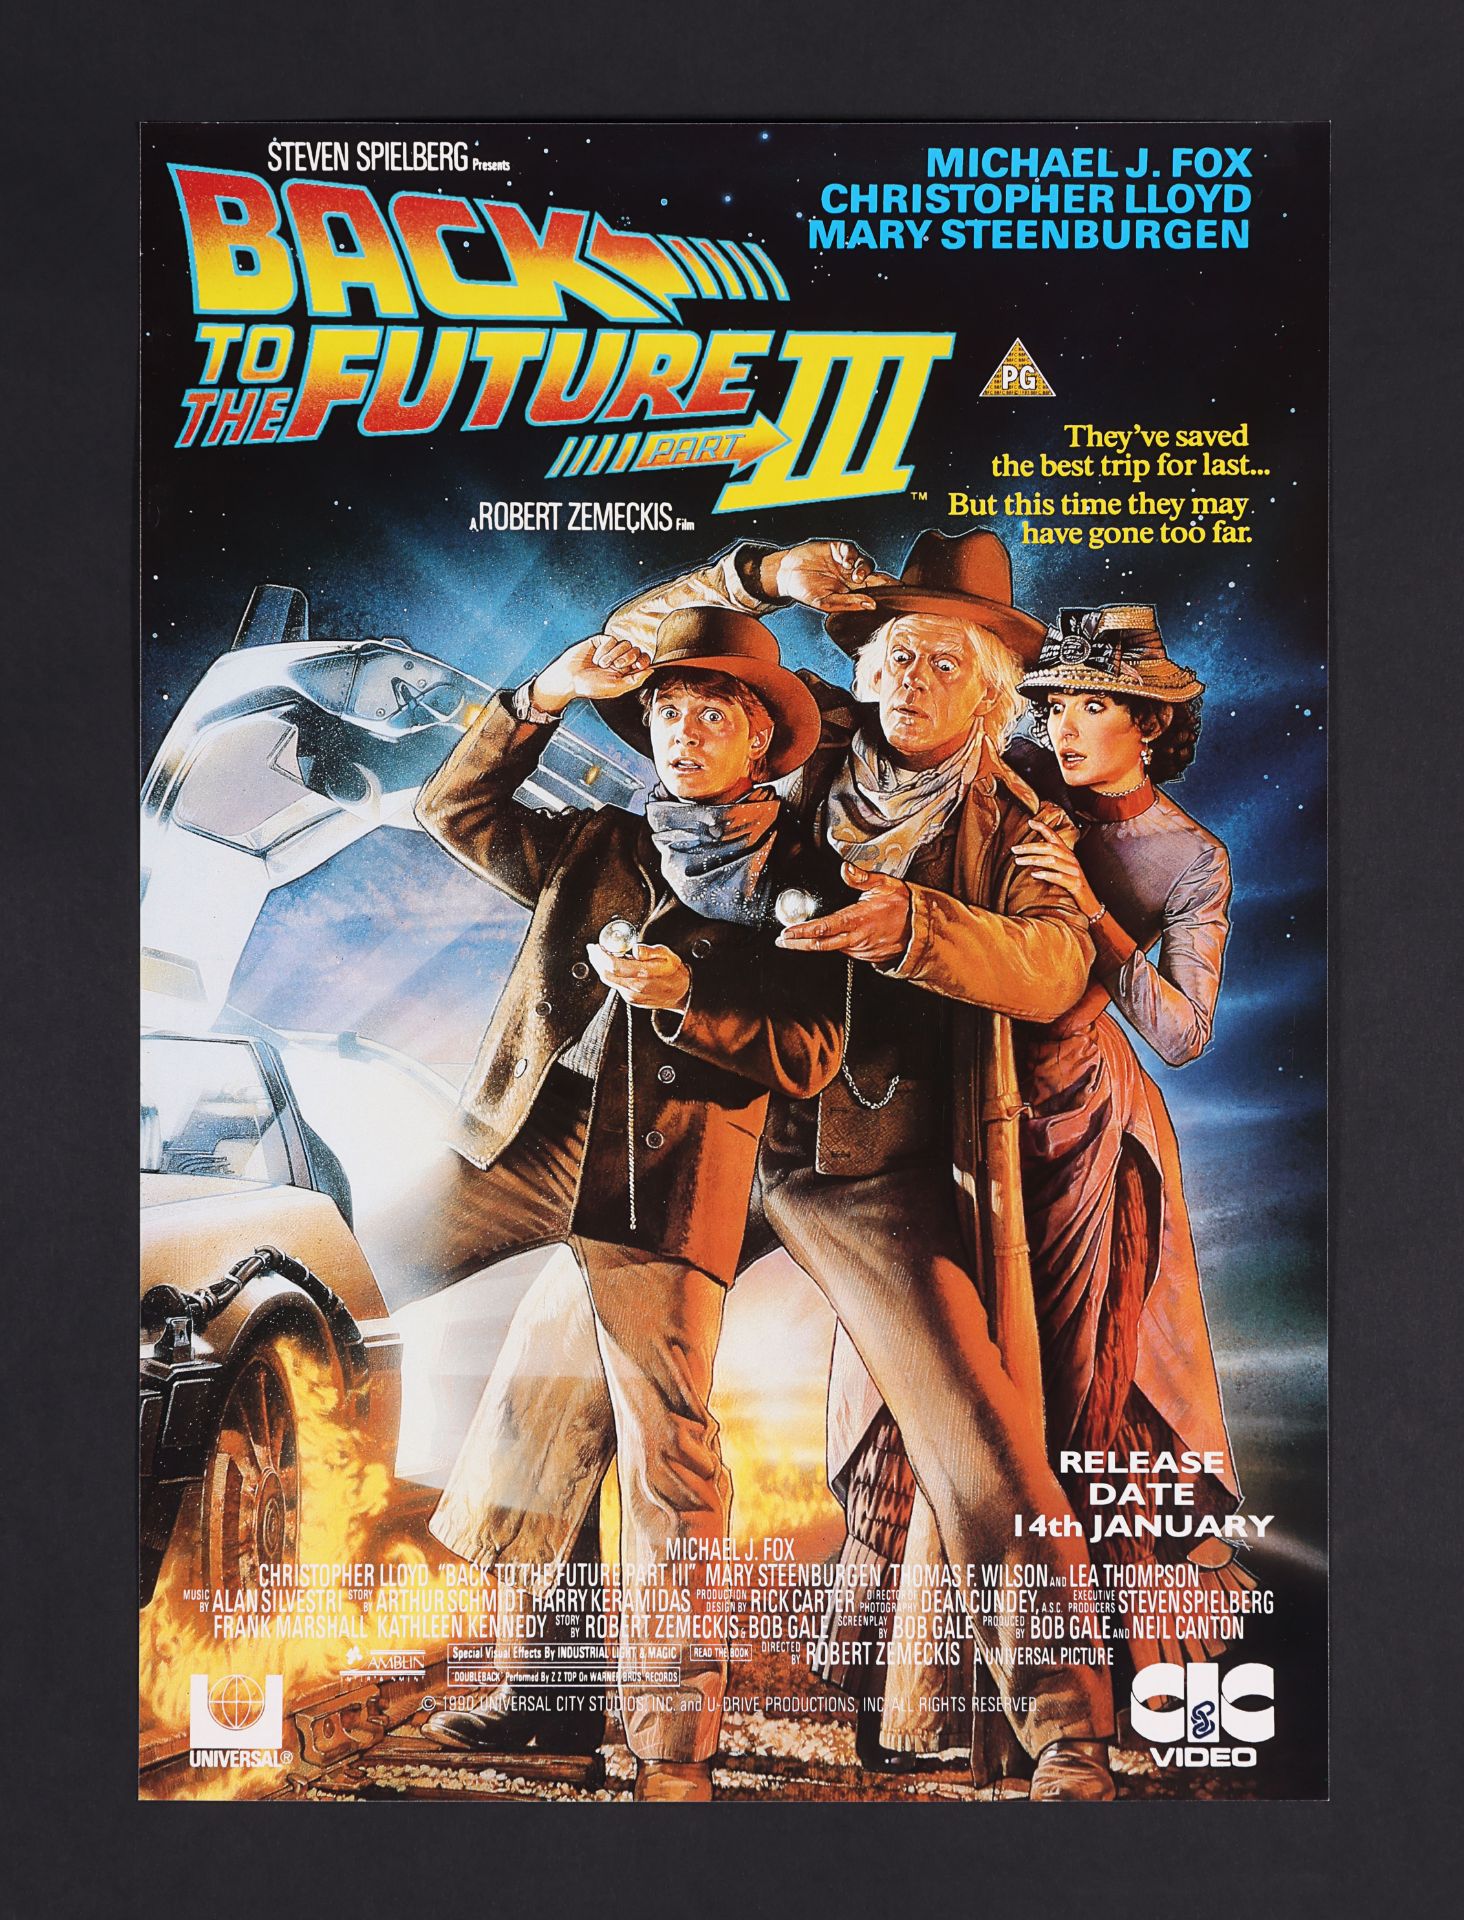 BACK TO THE FUTURE TRILOGY (1985-1990) - Three UK Video Posters, 1986 - 1991 - Image 3 of 3